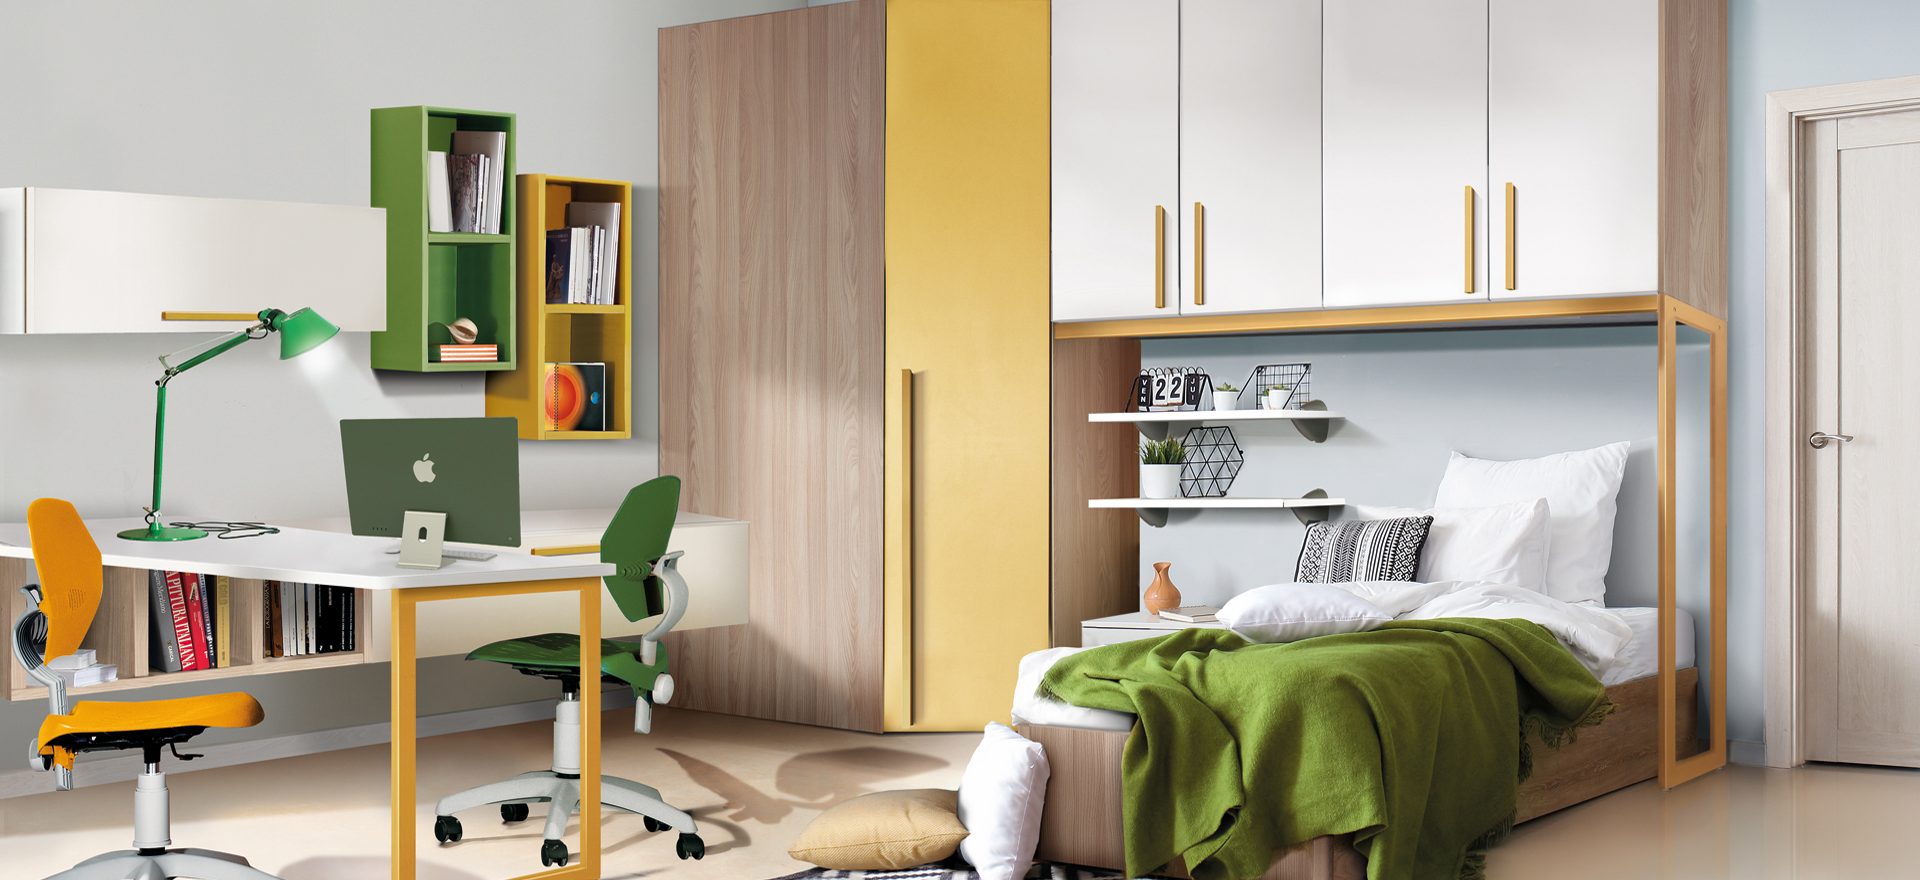 bedroom-furniture-young-olmo-yellow